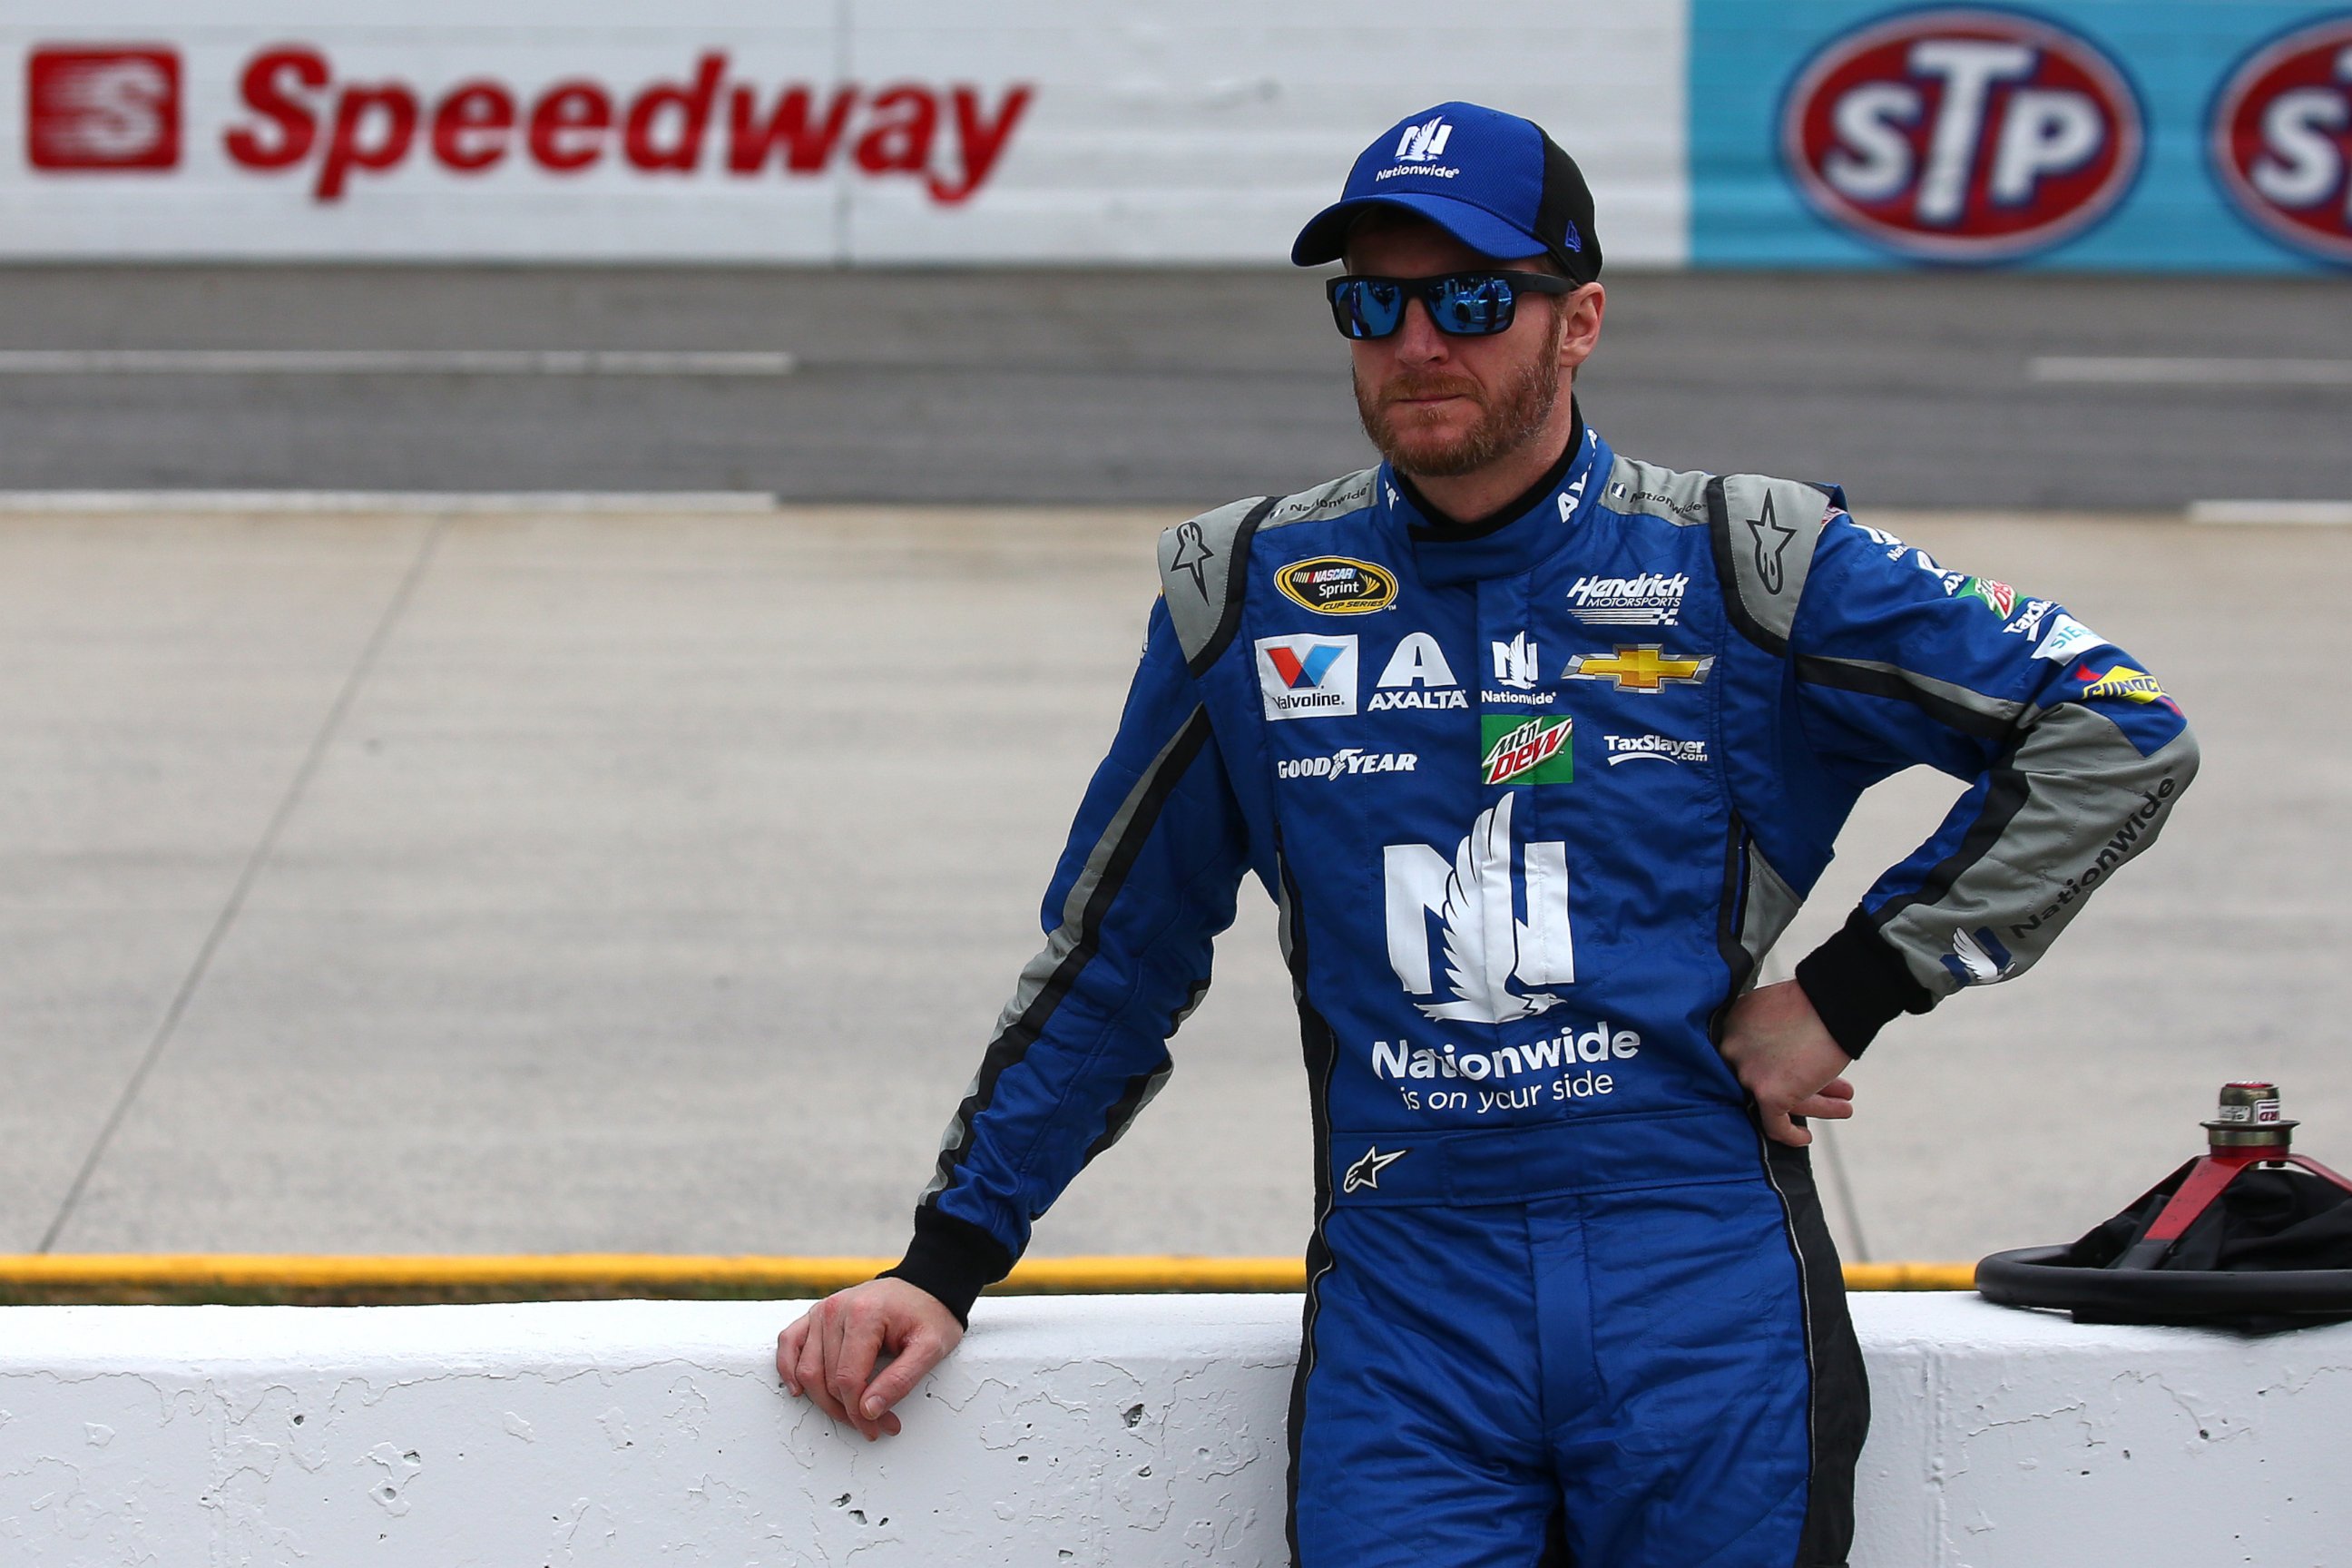 PHOTO: Dale Earnhardt Jr., driver of the #88 Nationwide Chevrolet, at the Martinsville Speedway on April 1, 2016 in Martinsville, Virginia.  